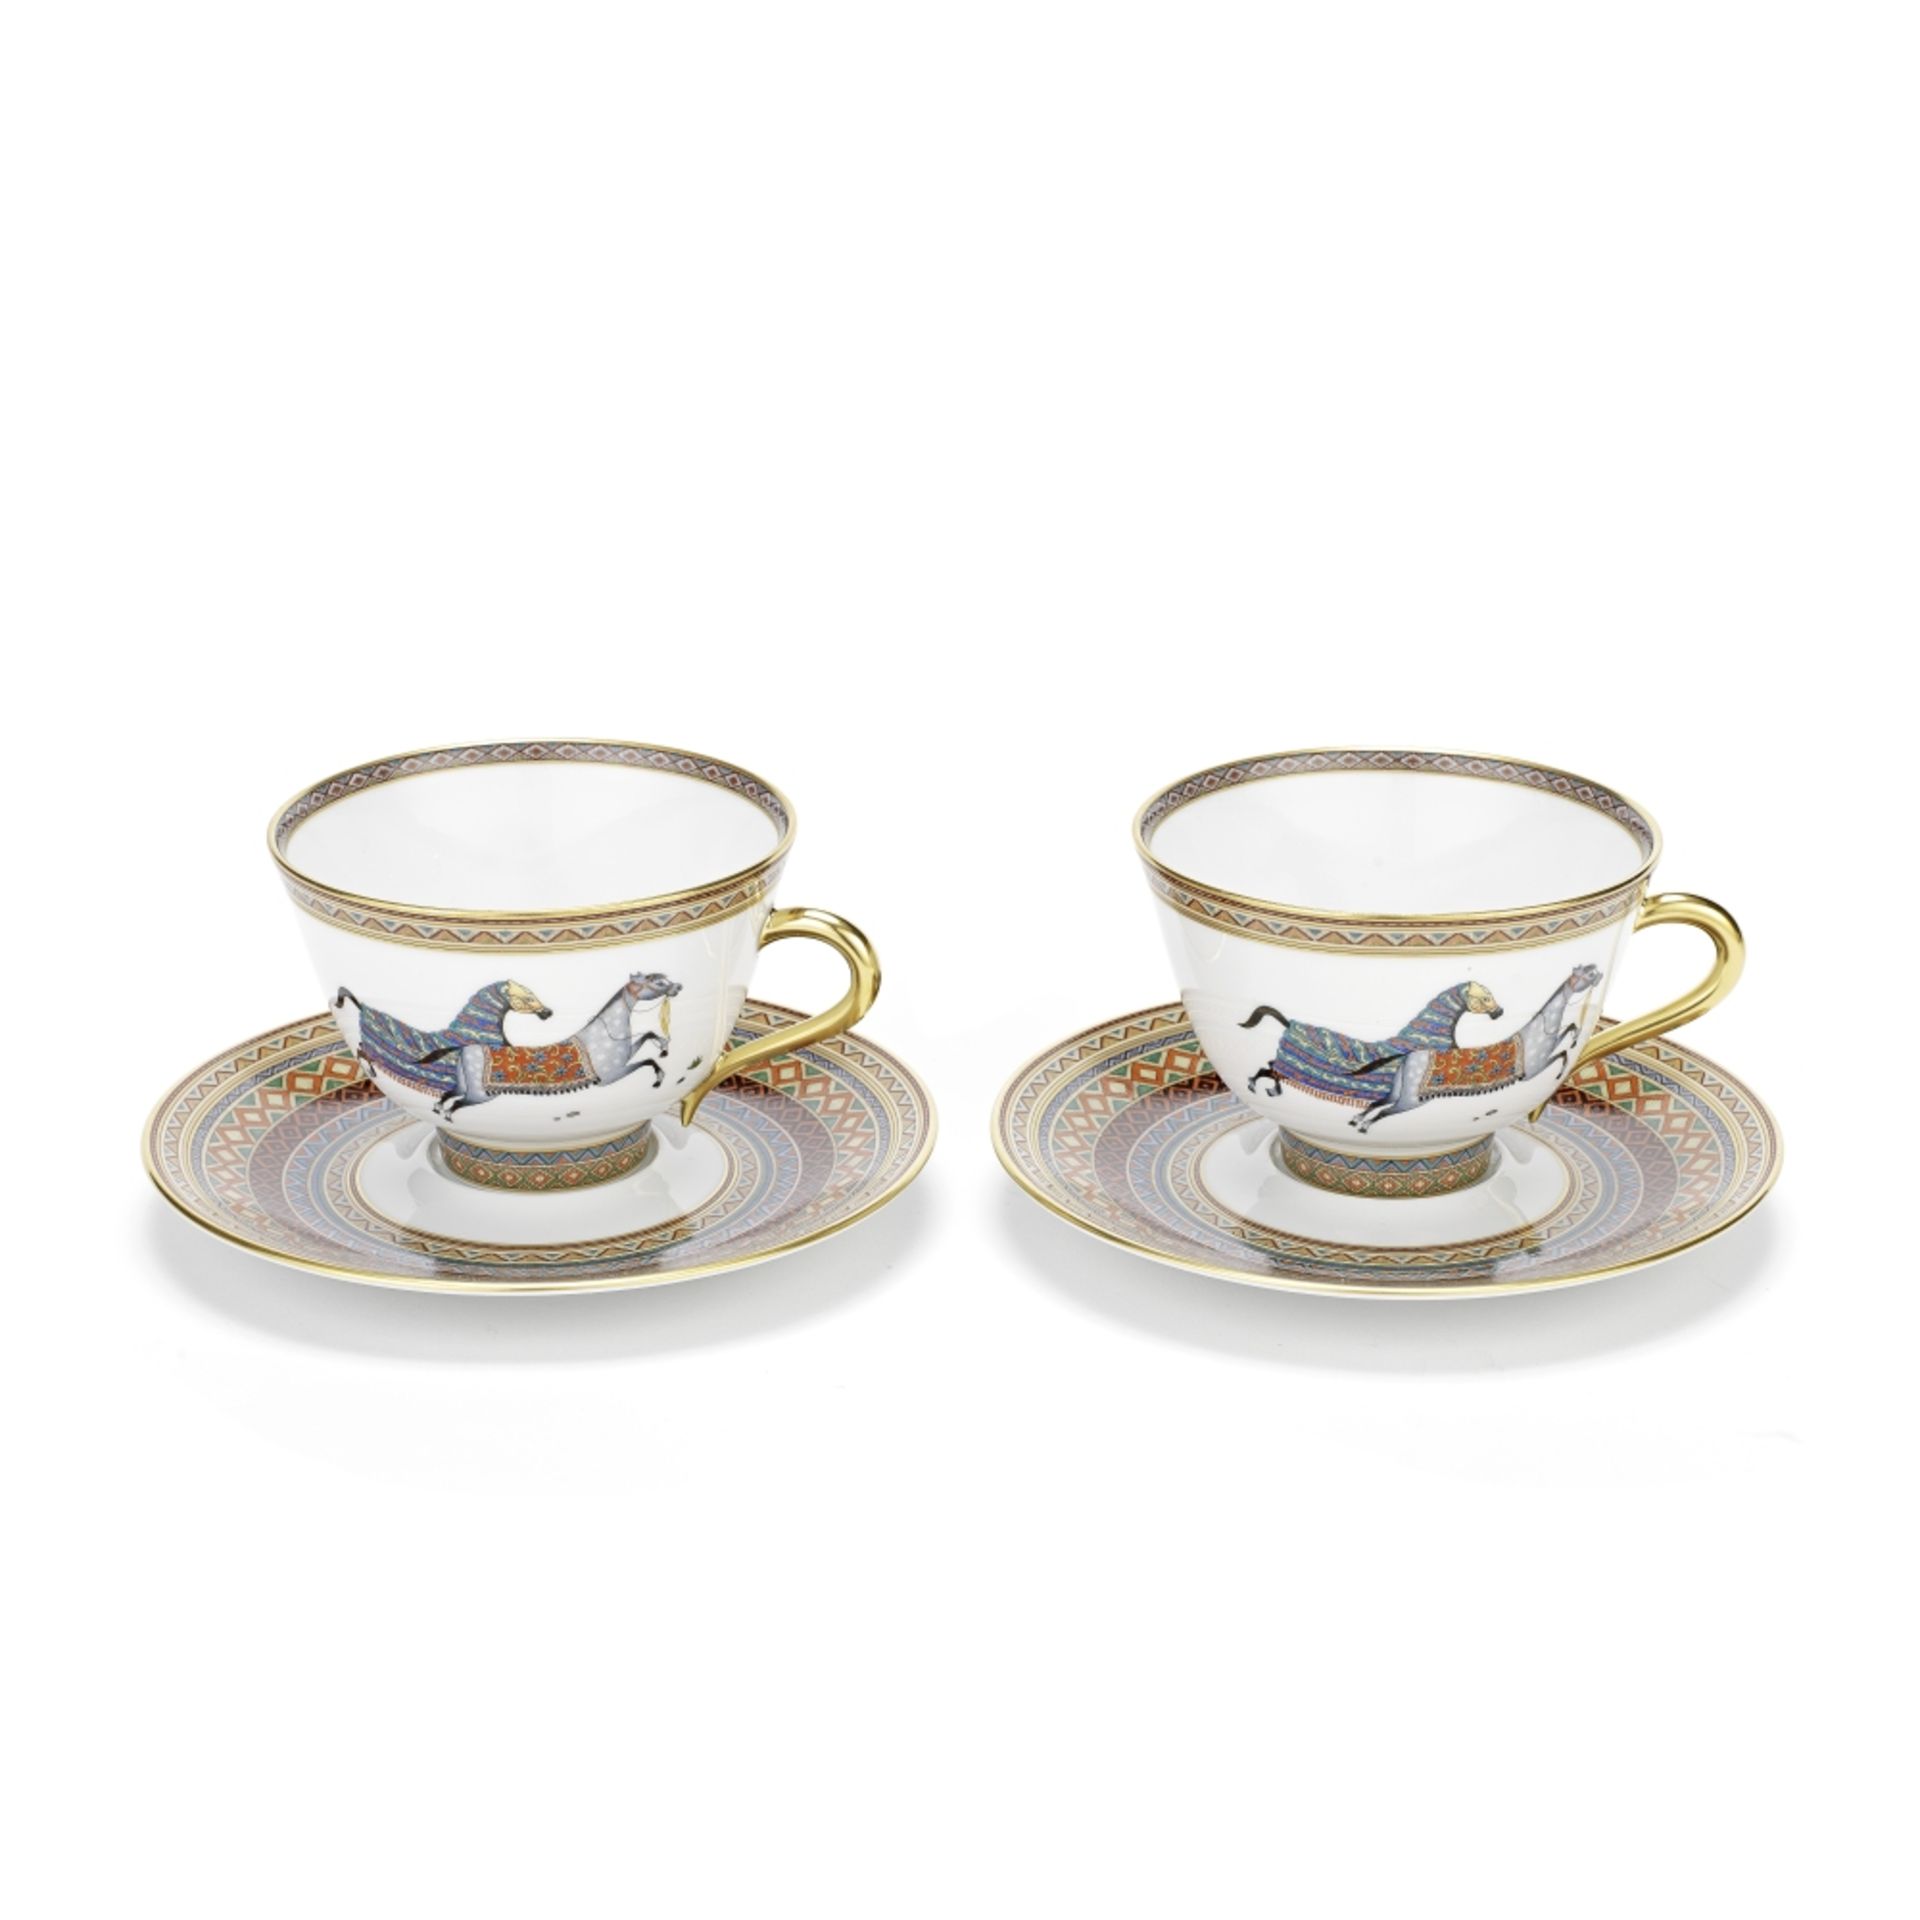 Herm&#232;s: Two Sets of 'Cheval d'Orient' Tea Cups and Saucers c.2022 (includes box)